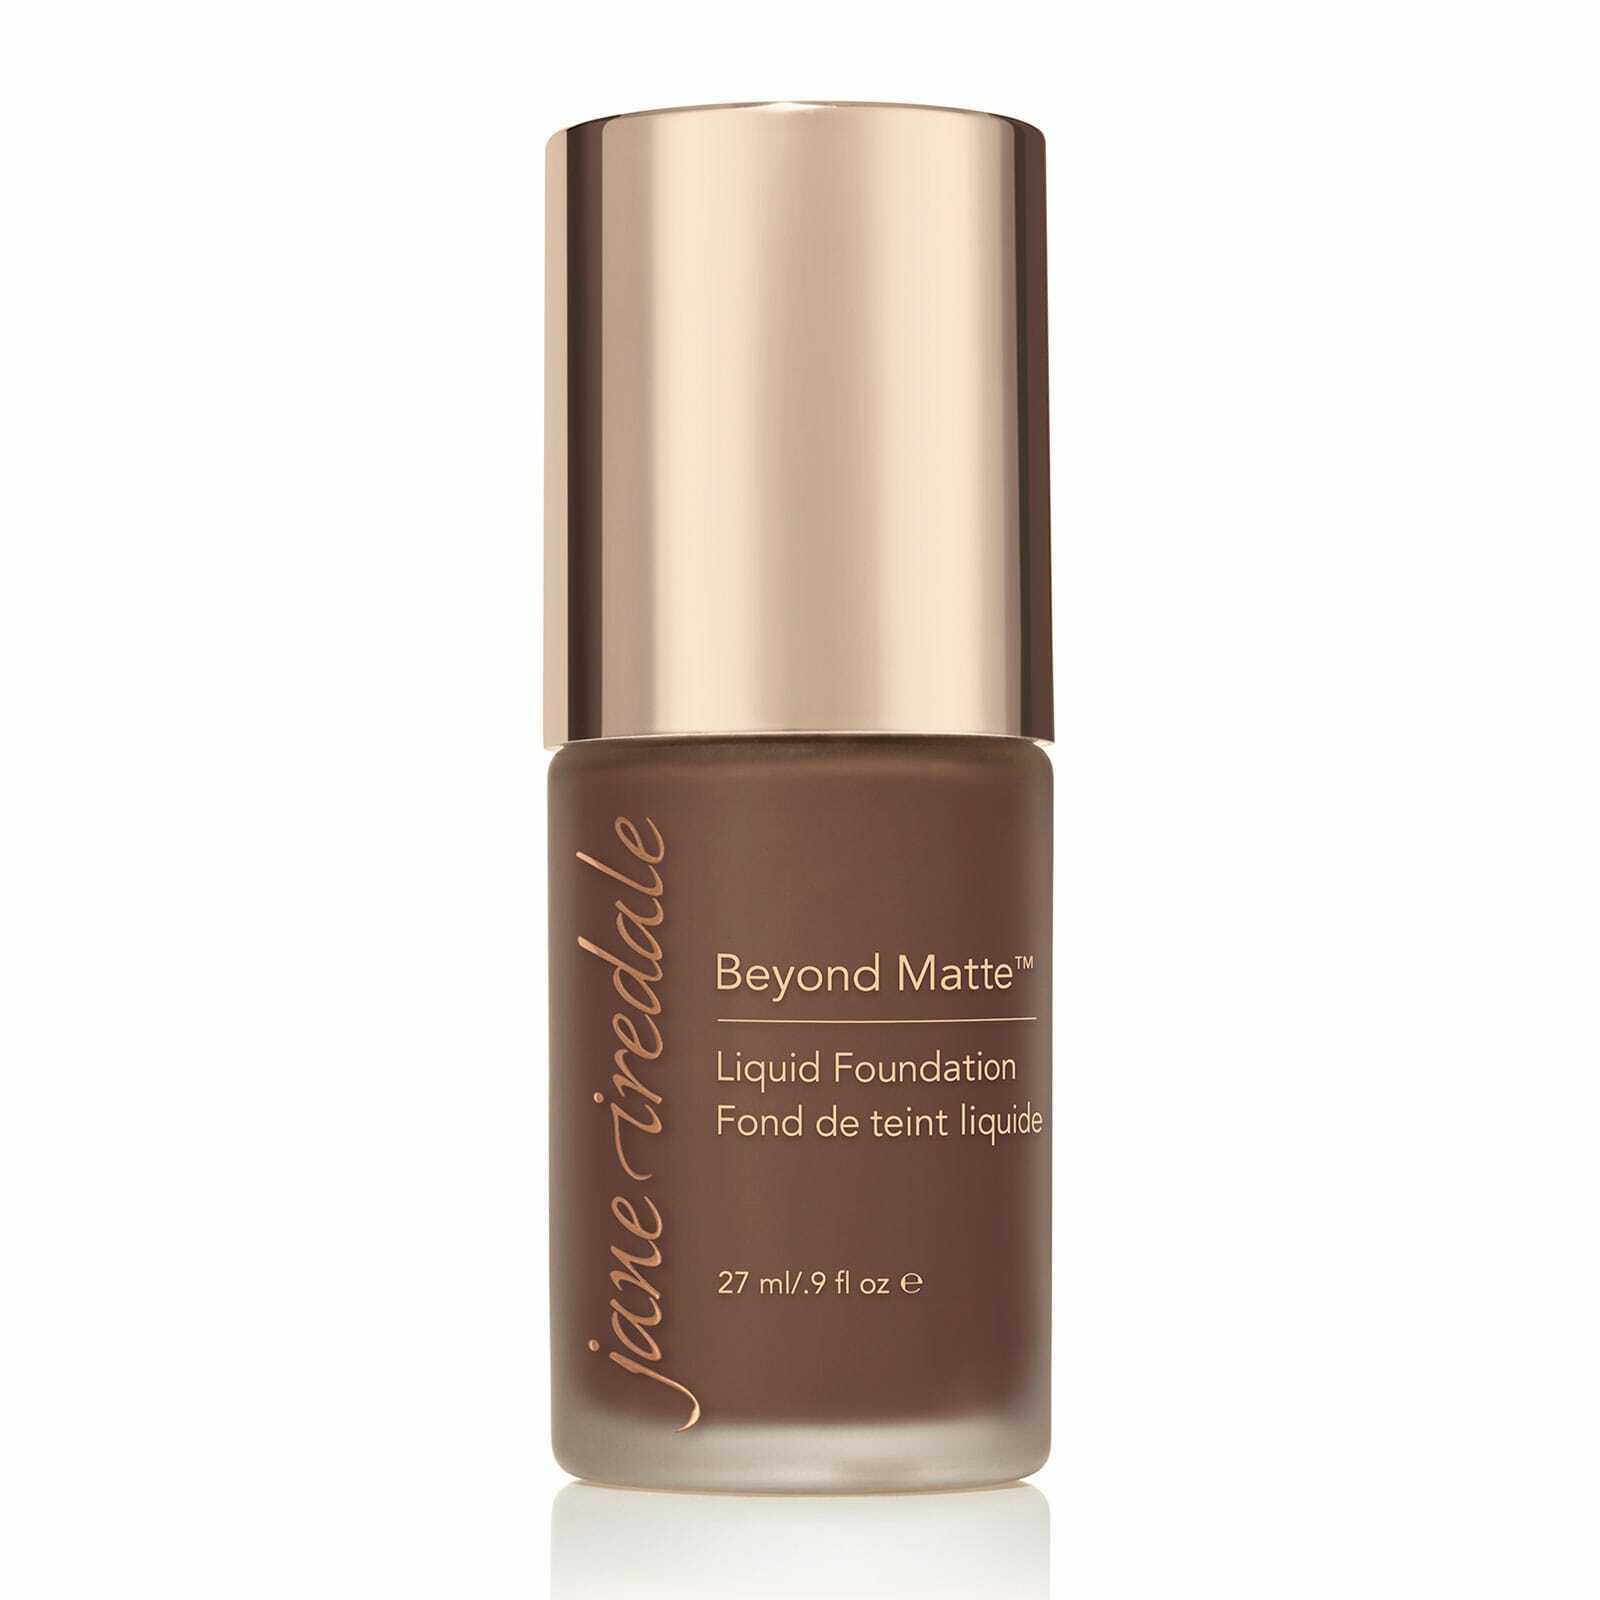 Jane Iredale Beyond Matte Liquid Foundation 27ml - M18  Introducing Beyond Matte Liquid Foundation!  With buildable coverage and a semi-matte finish, this is a skin-loving, clean, vegan liquid foundation.  A primer, concealer and foundation - all in one!